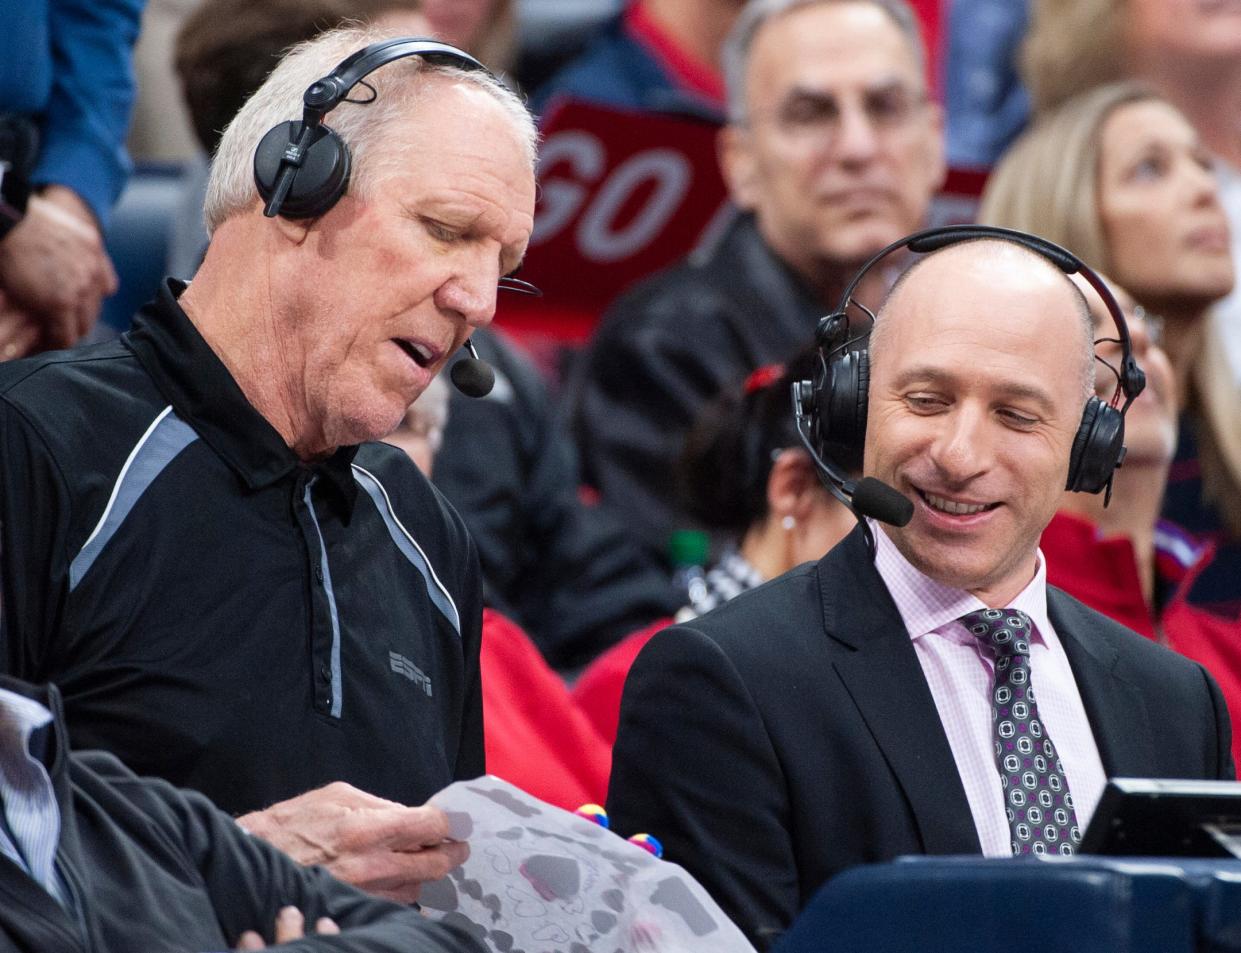 Pac-12 basketball analysts Bill Walton (left) and Dave Pasch (right) look on as the Arizona Wildcats play the Washington Huskies during the first half at McKale Center on Feb. 7, 2019.